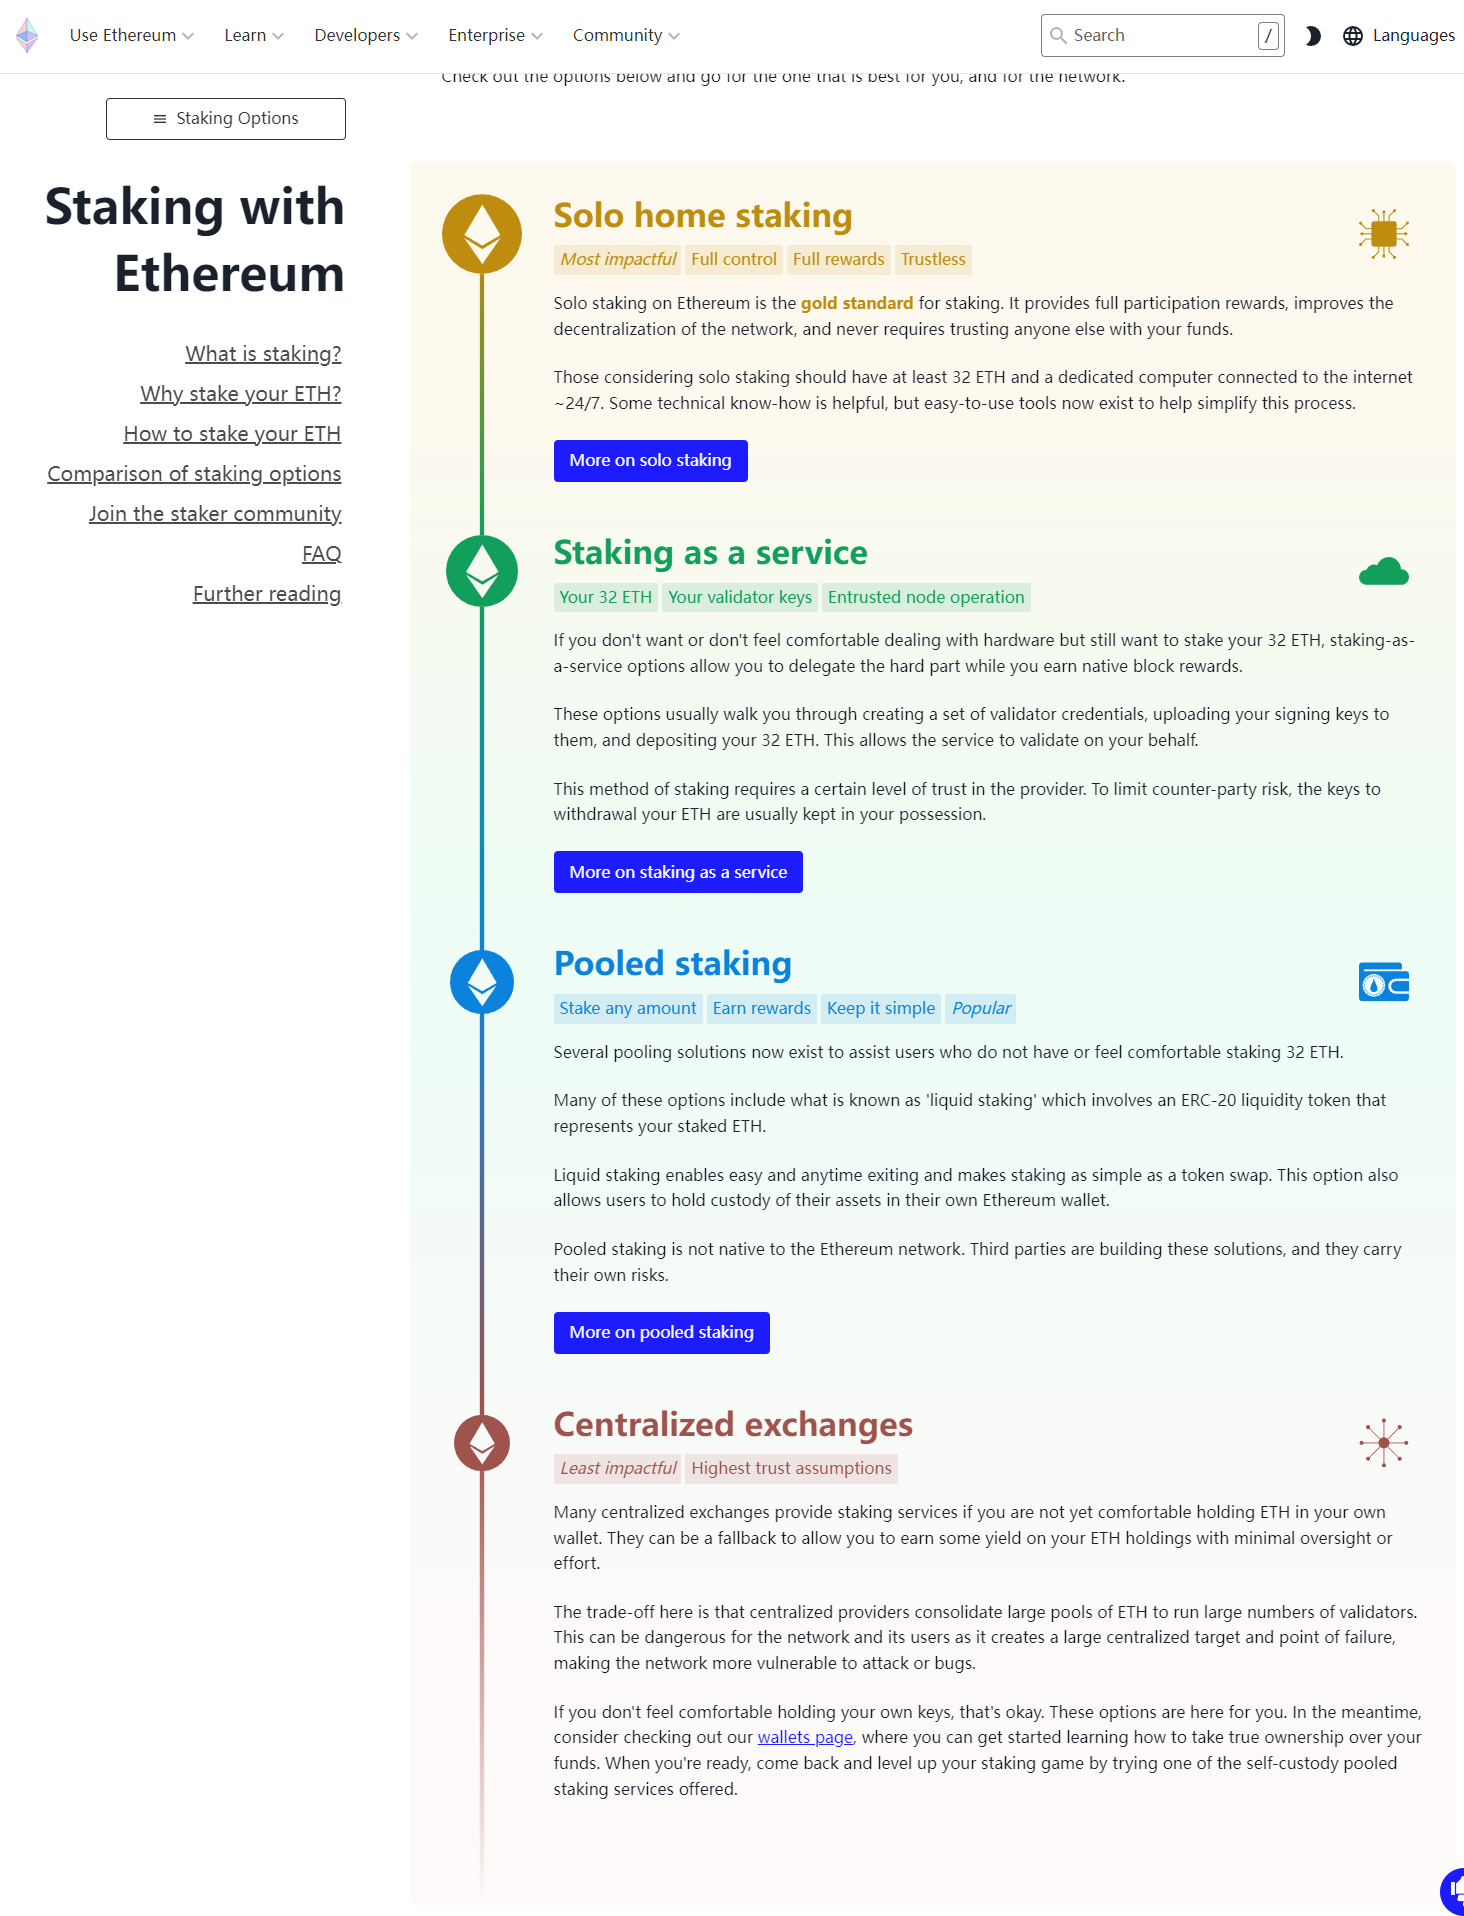 4 Staking Options - according to the Ethereum Foundation